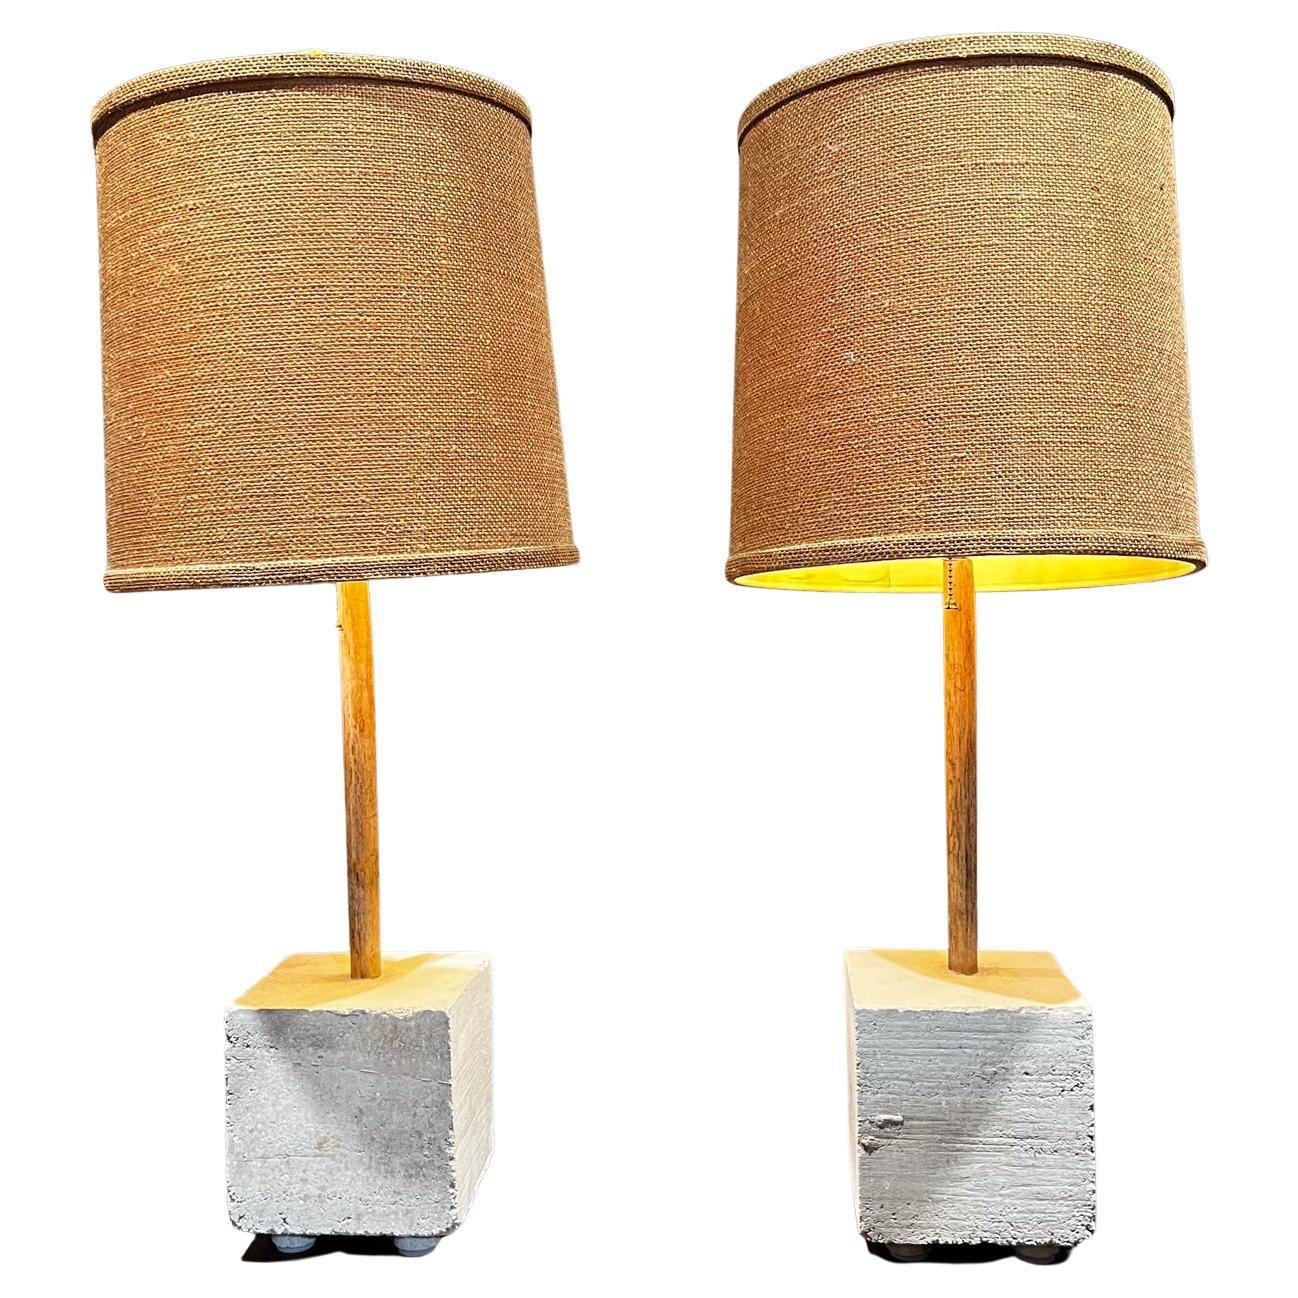 Contemporary Cube Table Lamps Rammed Earth & Bamboo by Pablo Romo
Square Rammed earth lamp with bamboo
6 x 6 x 20.25 tall
Original Vintage condition. No shades are included.
Review all images.